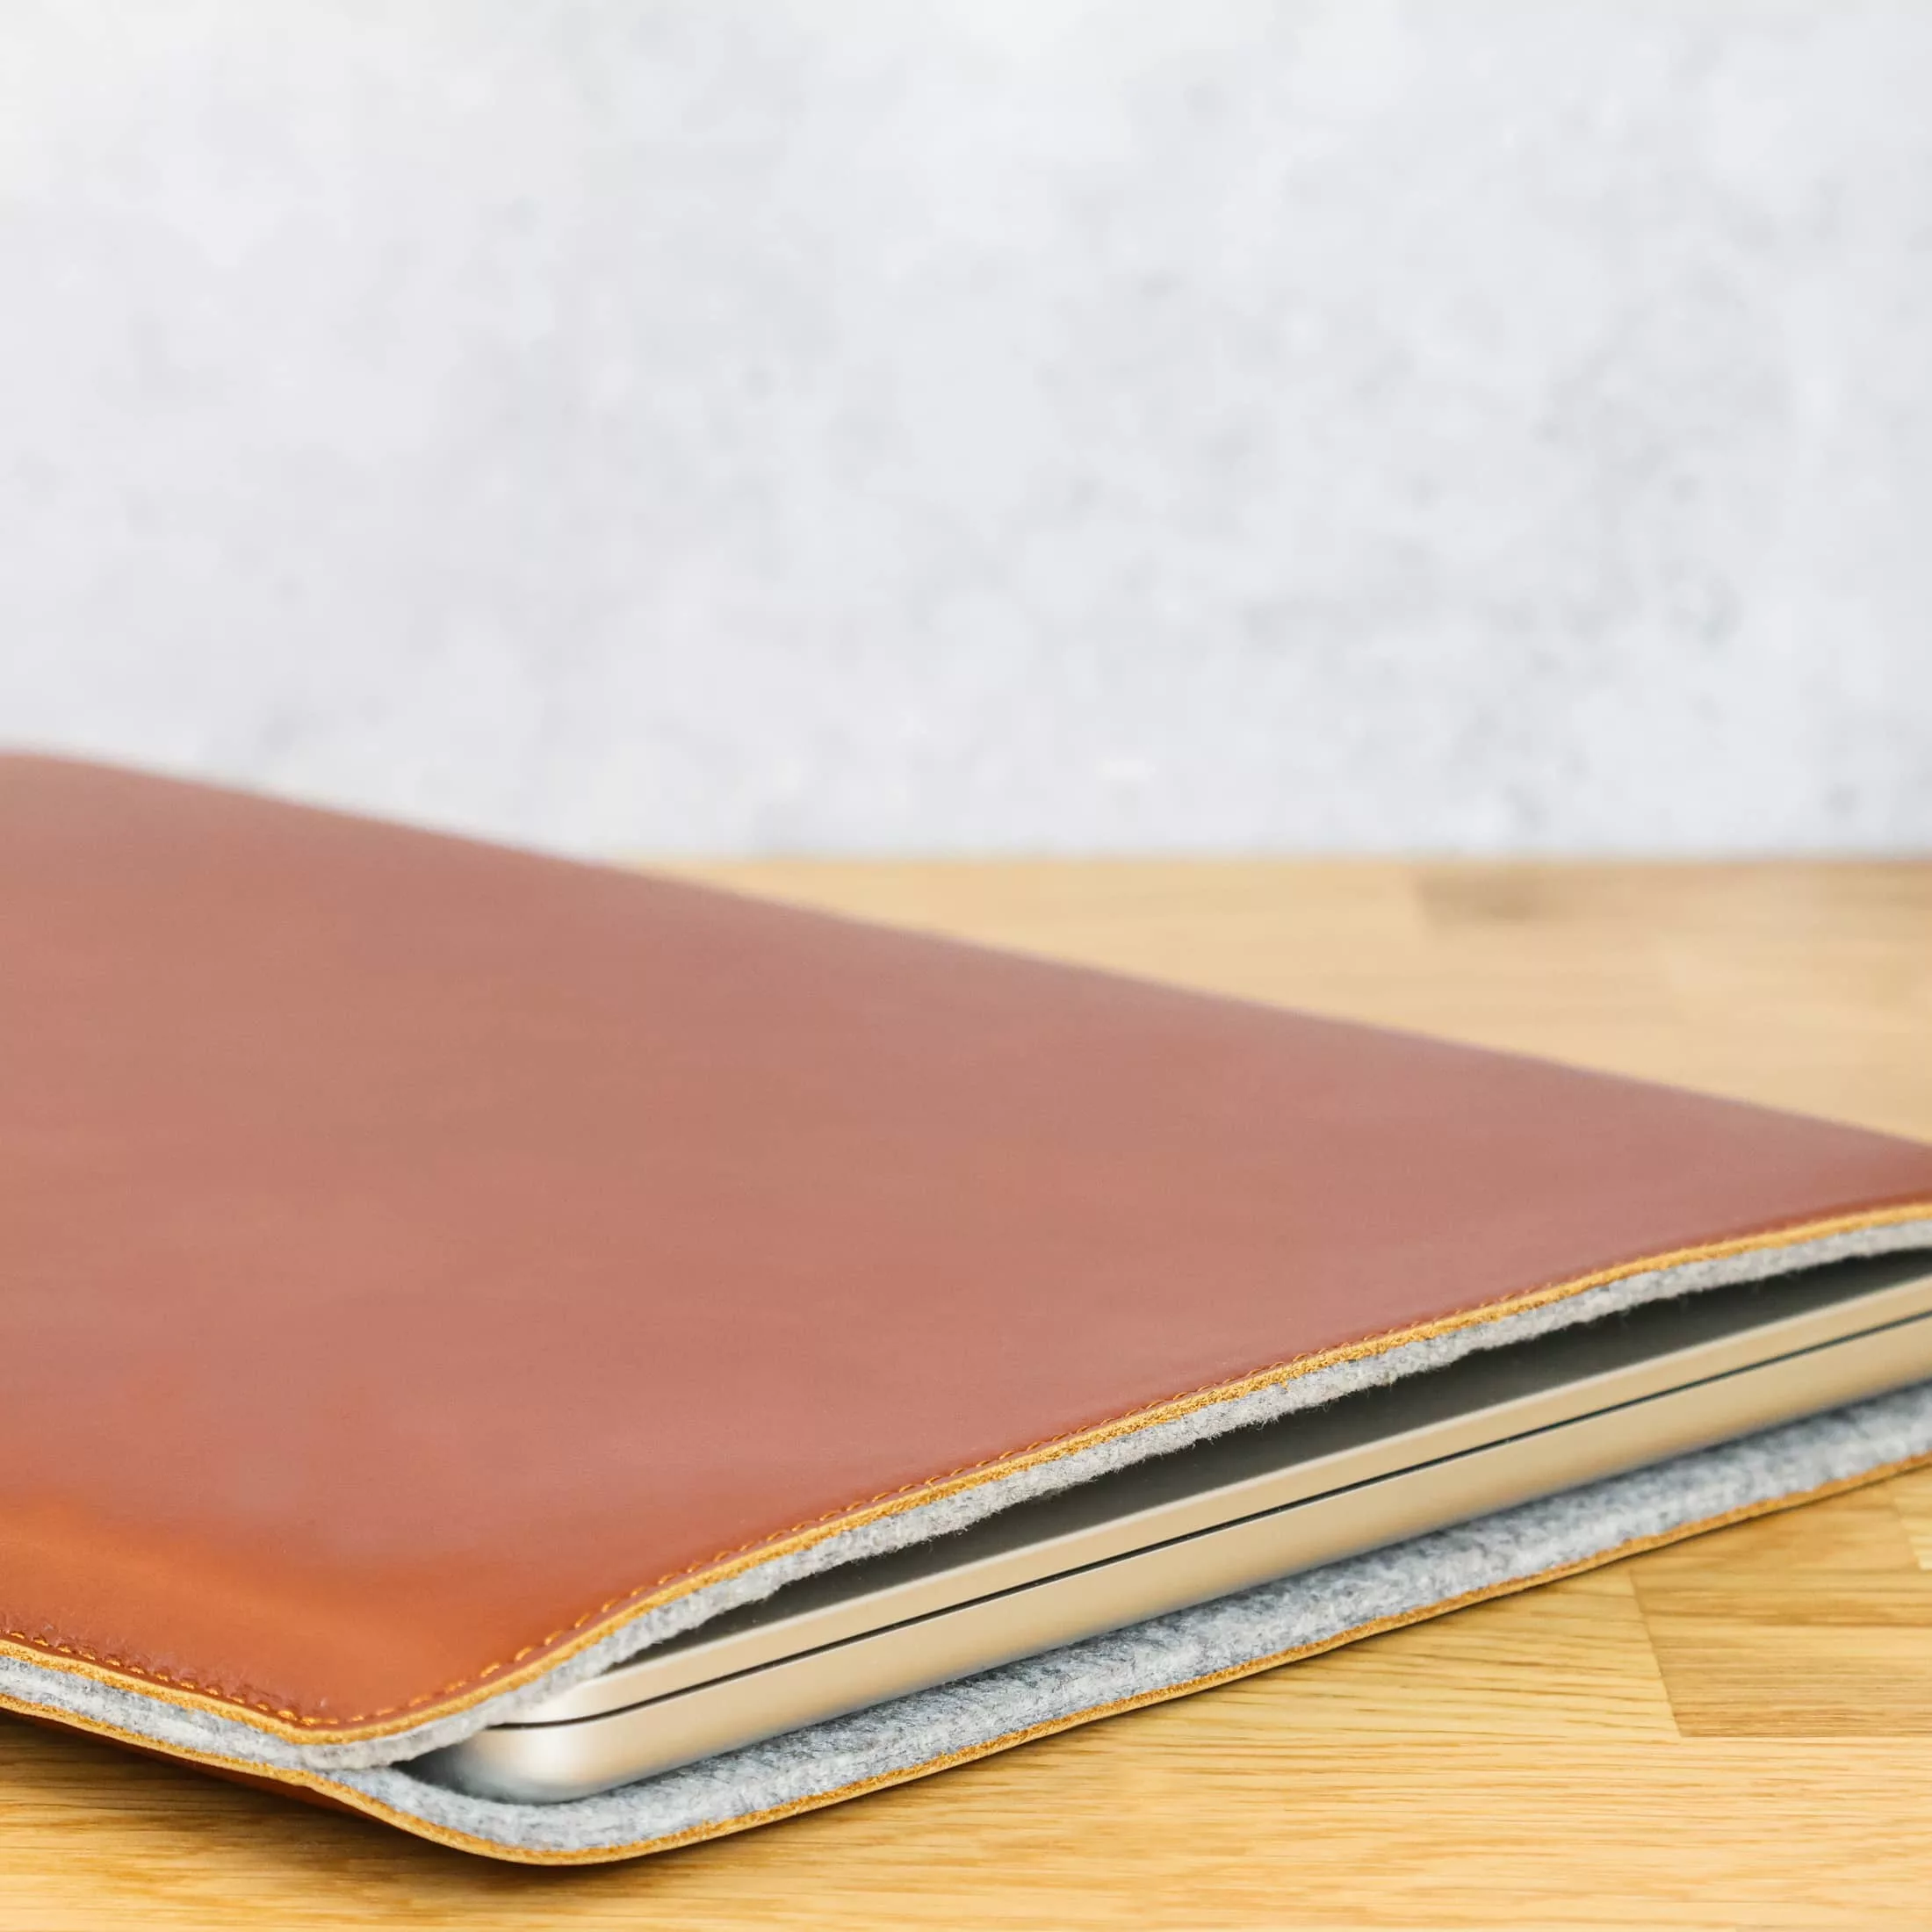 Macbook leather sleeve with wool lining